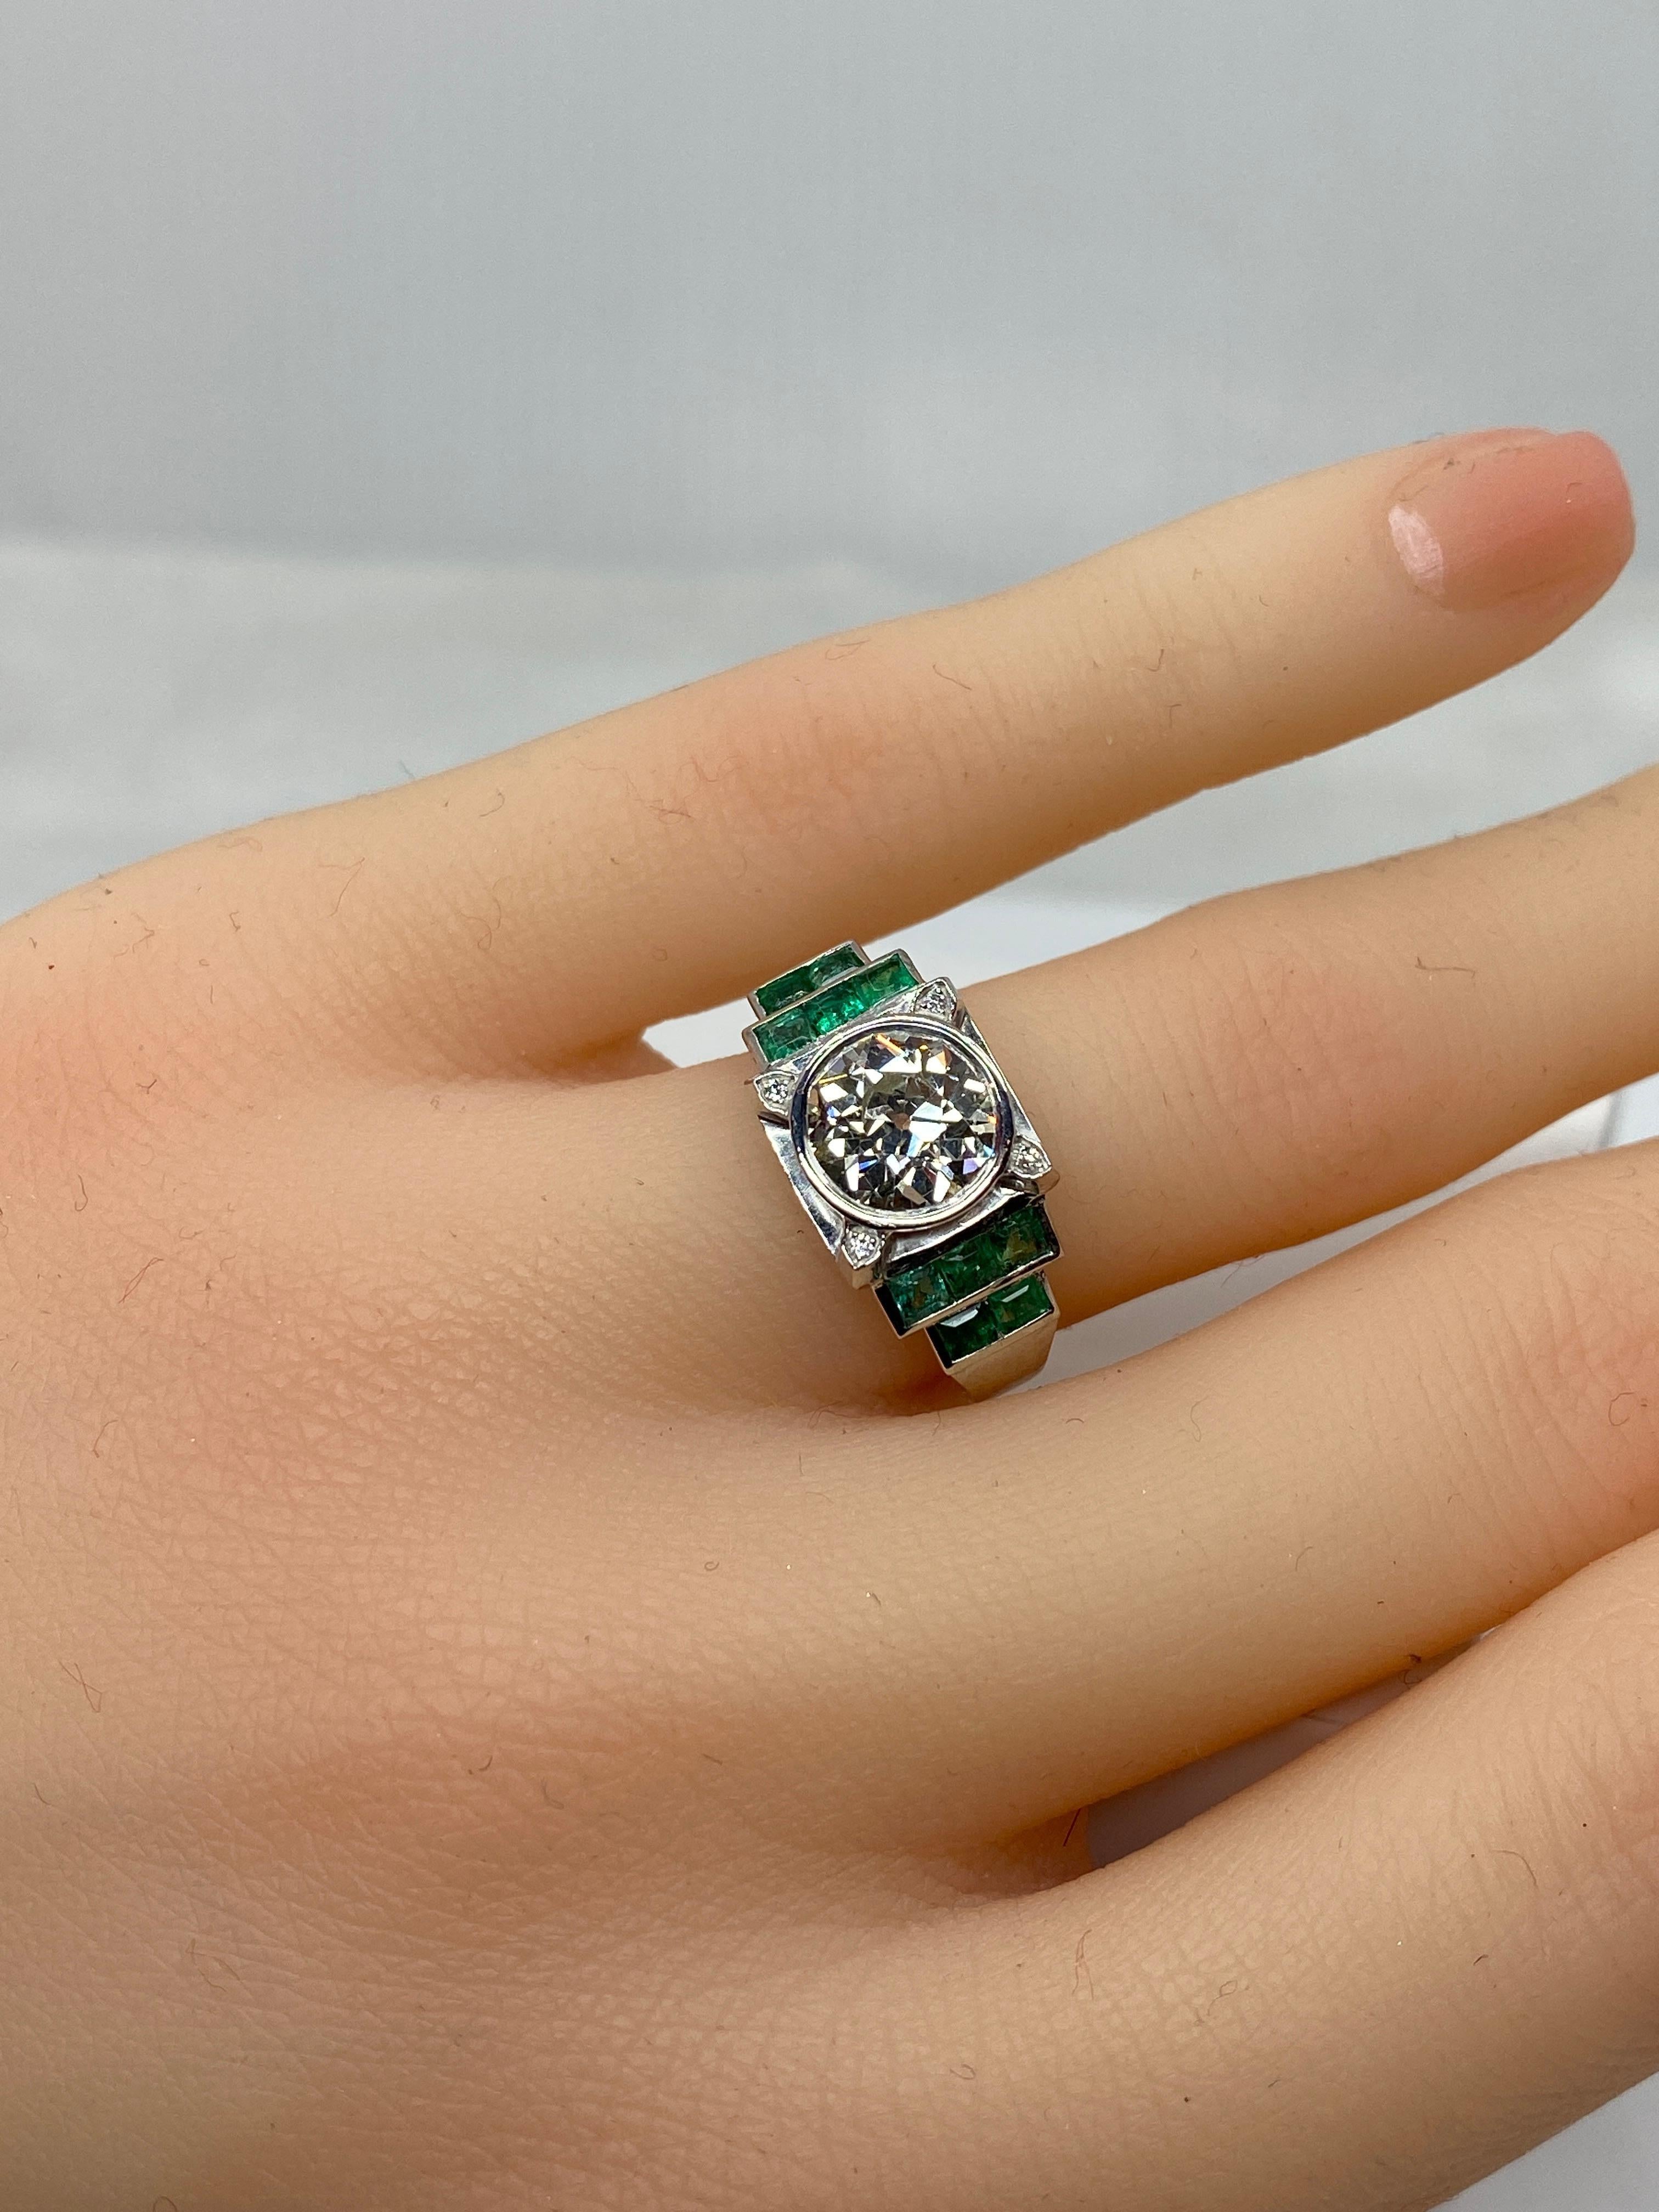 Platinium Engagement Ring Set with a 1.55 Carat Diamond Backed by Emeralds, 1900 For Sale 5